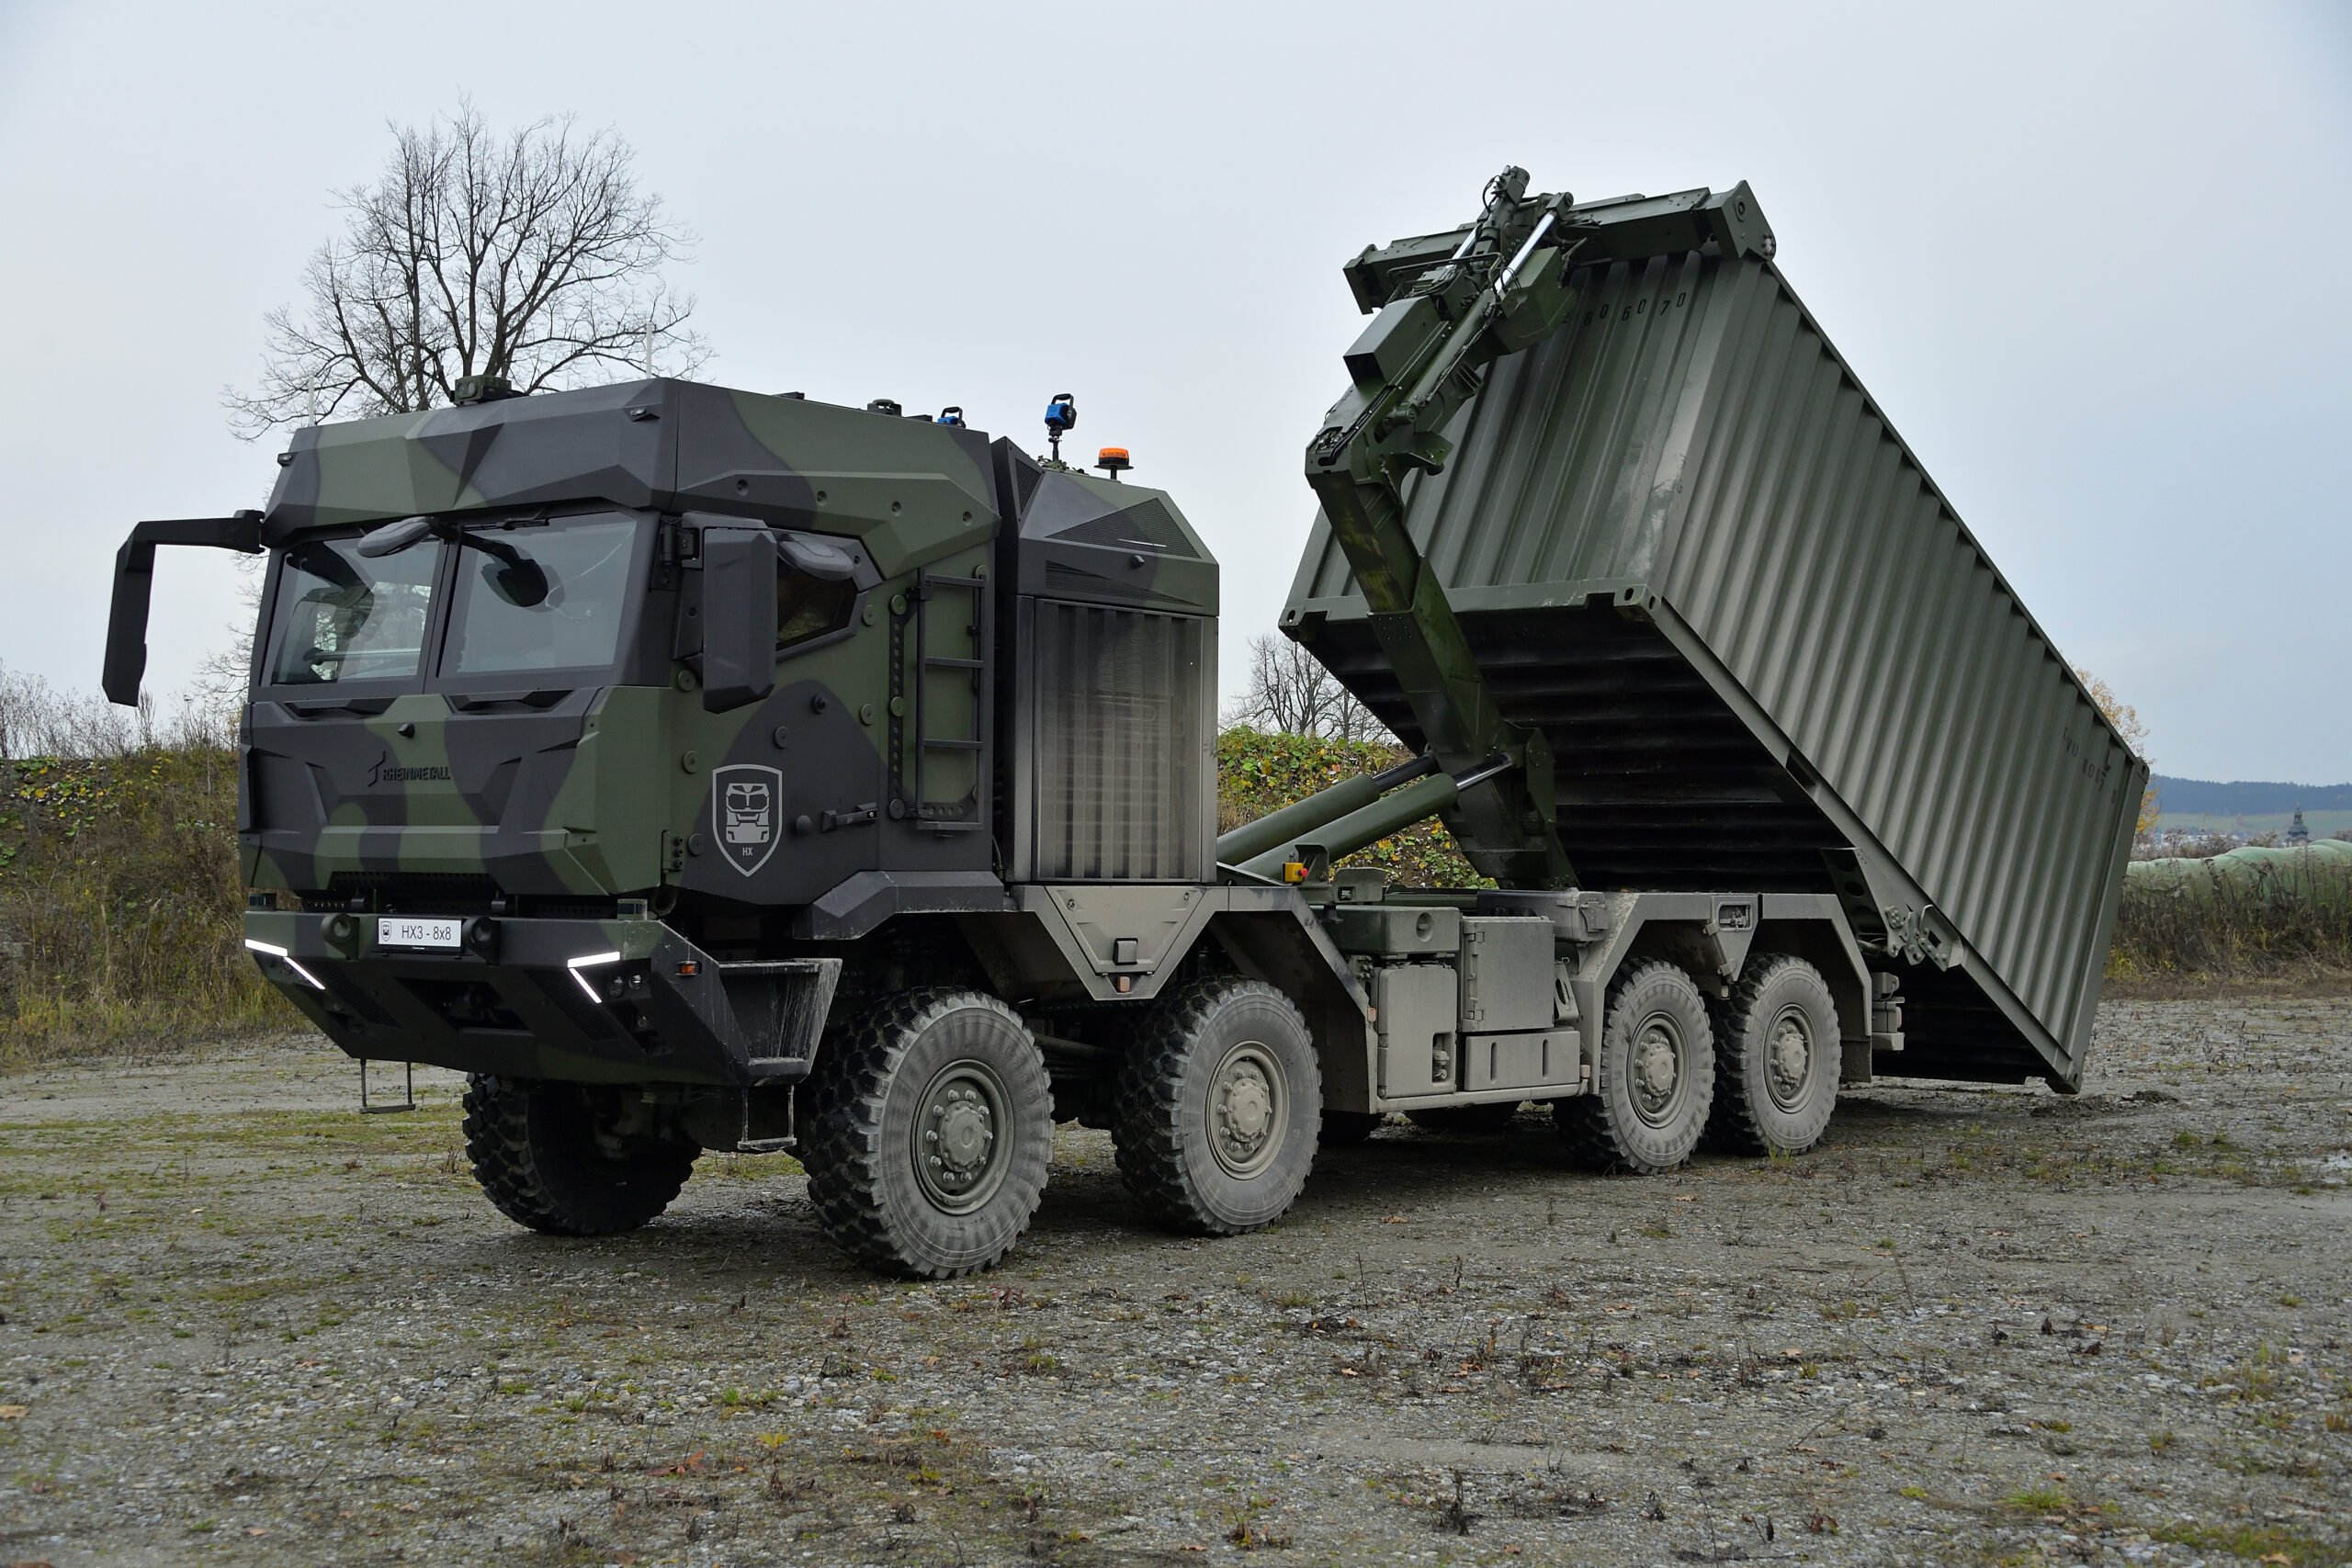 A collaboration that has what the Army needs for the Common Tactical Truck